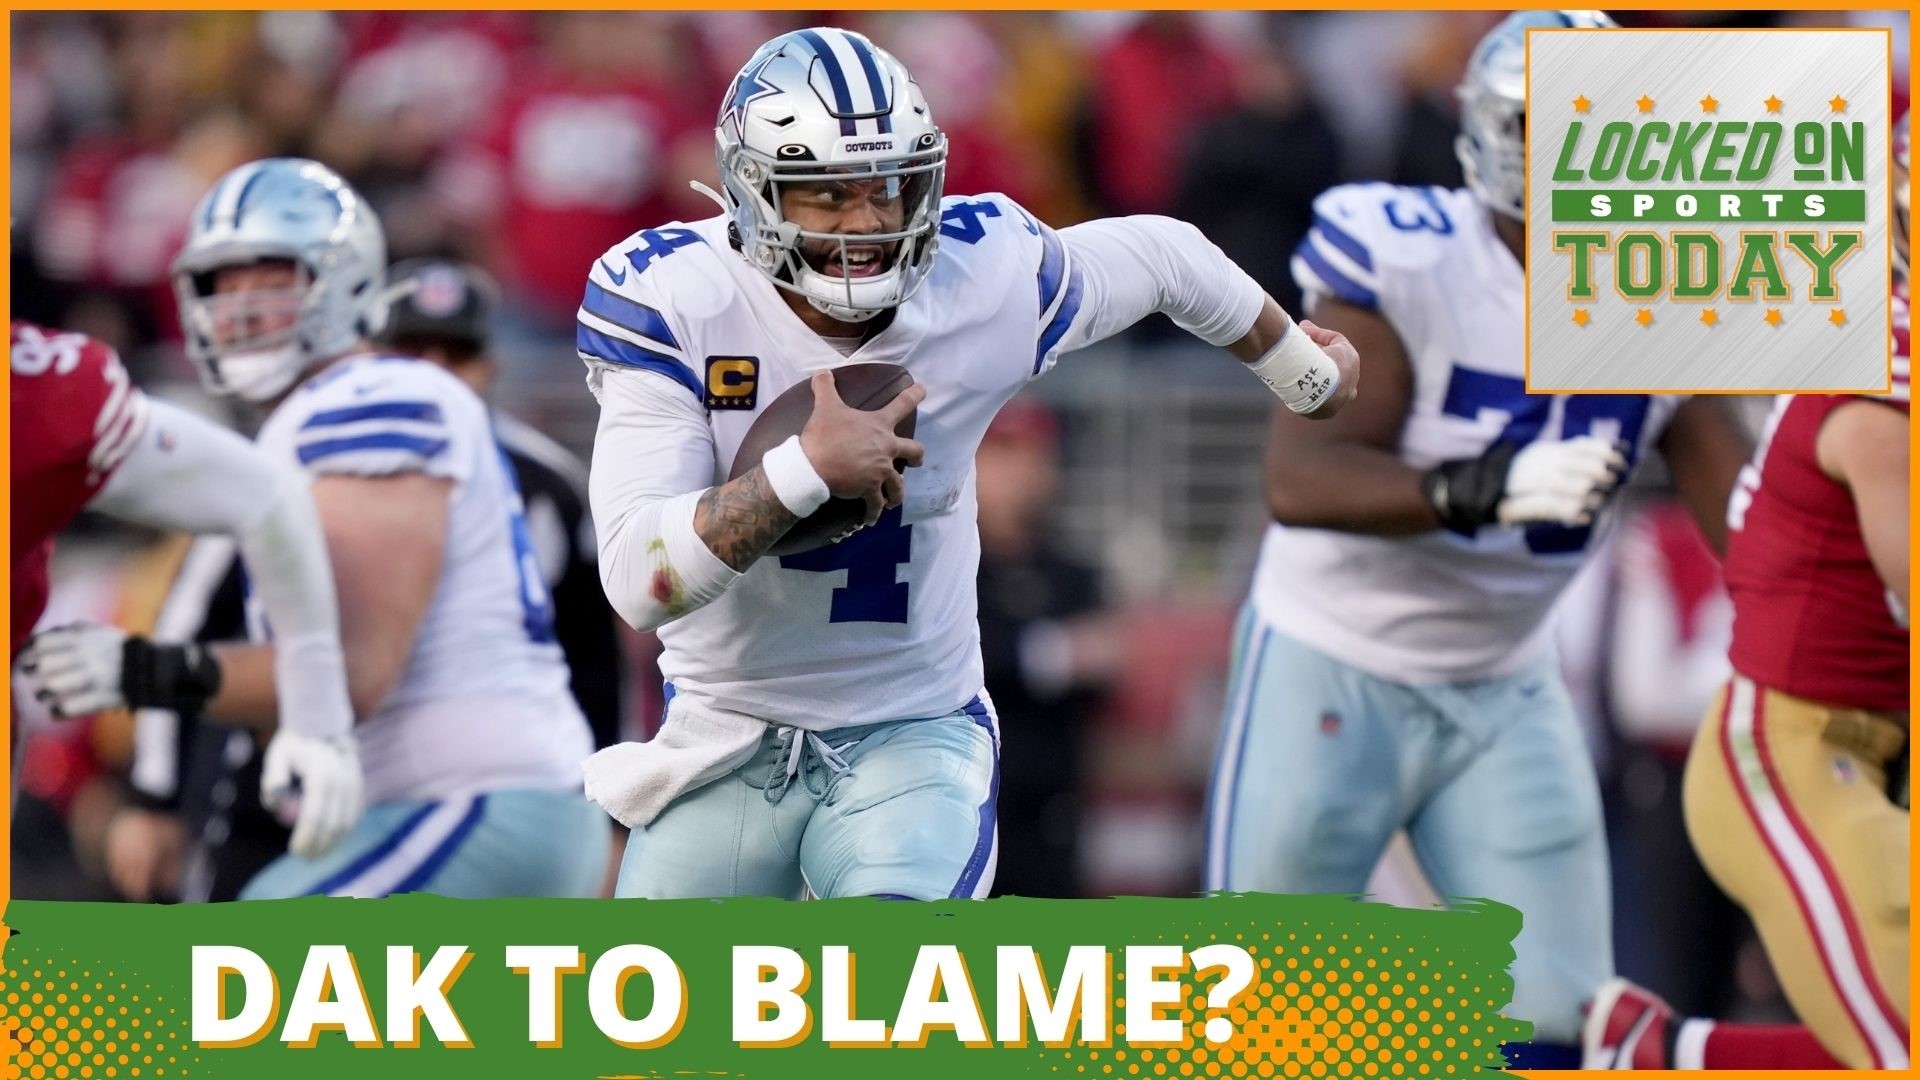 Discussing the day's top sports stories from why the Cowboys' loss doesn't fall on Dak's shoulders to how the Eagles prove you can't out scheme more talent.